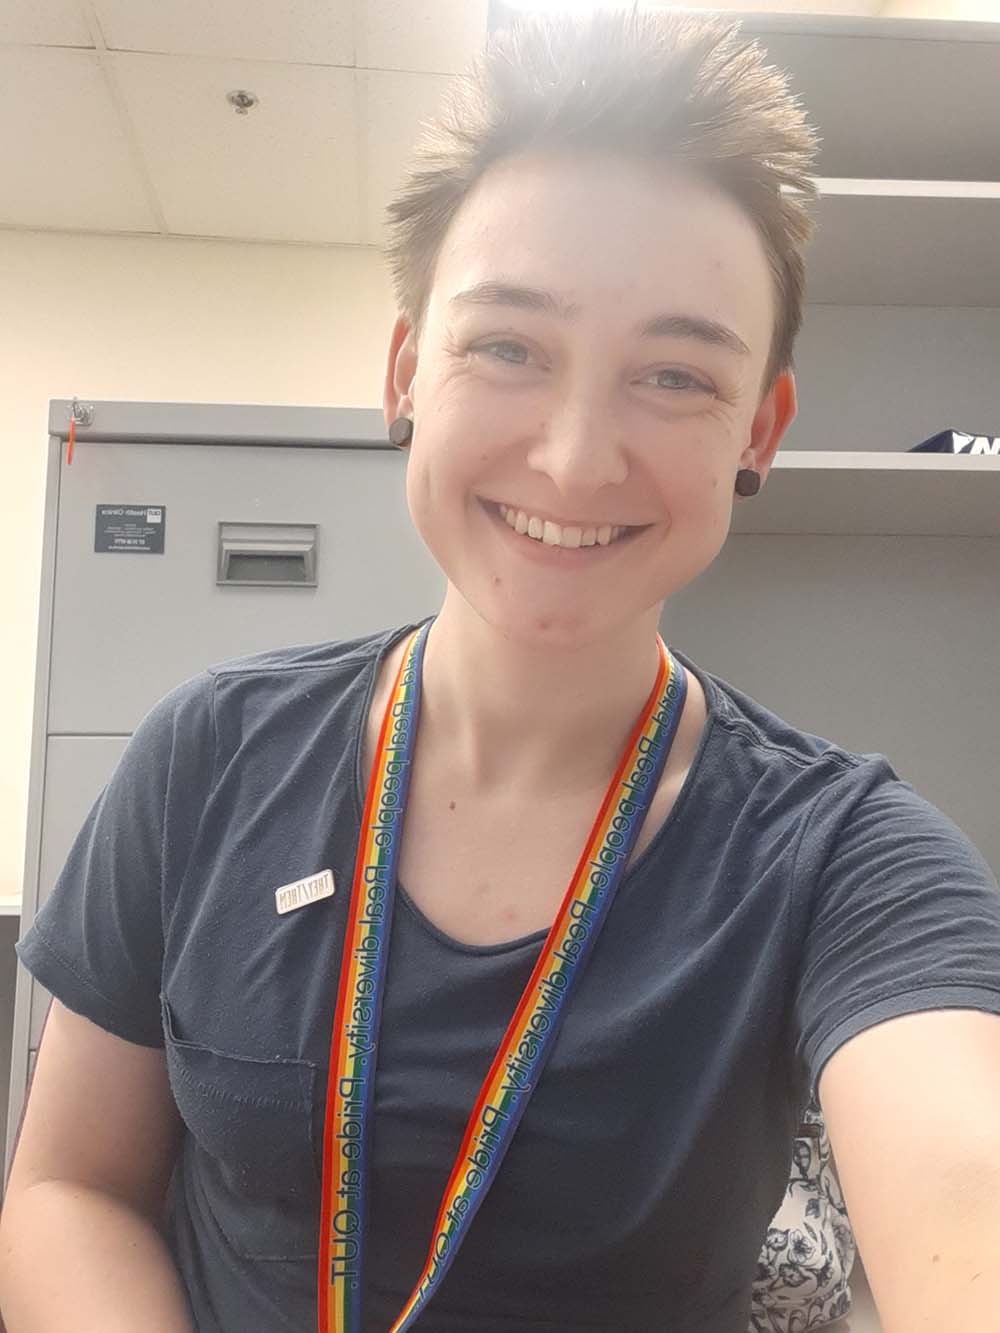 A smiling student wearing a rainbow lanyard sits in a research office.